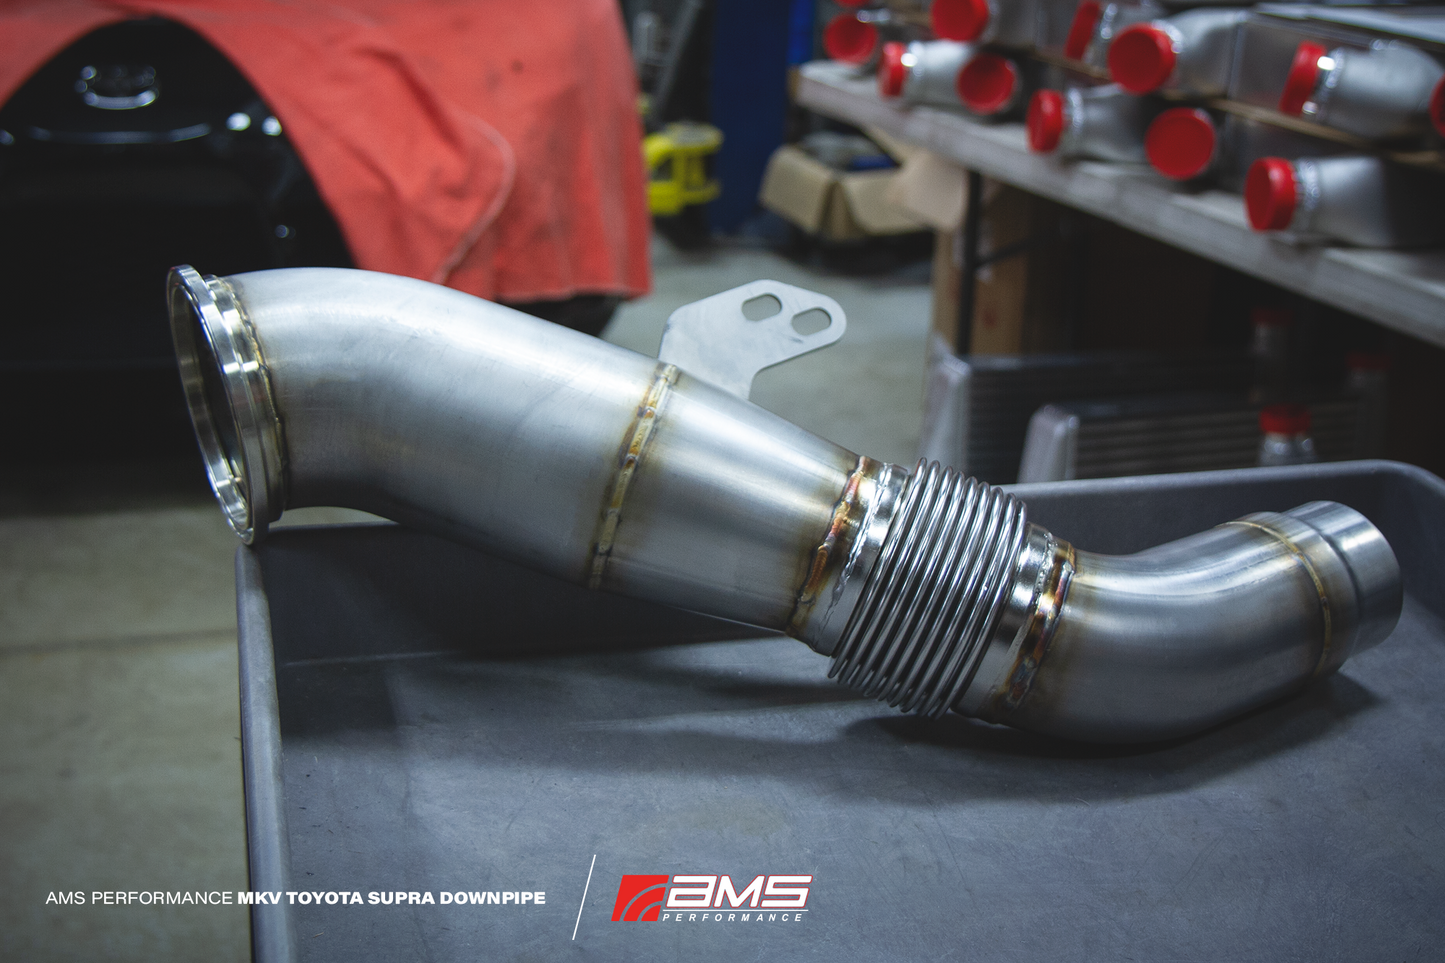 AMS PERFORMANCE TOYOTA GR SUPRA STAINLESS STEEL RACE DOWNPIPE